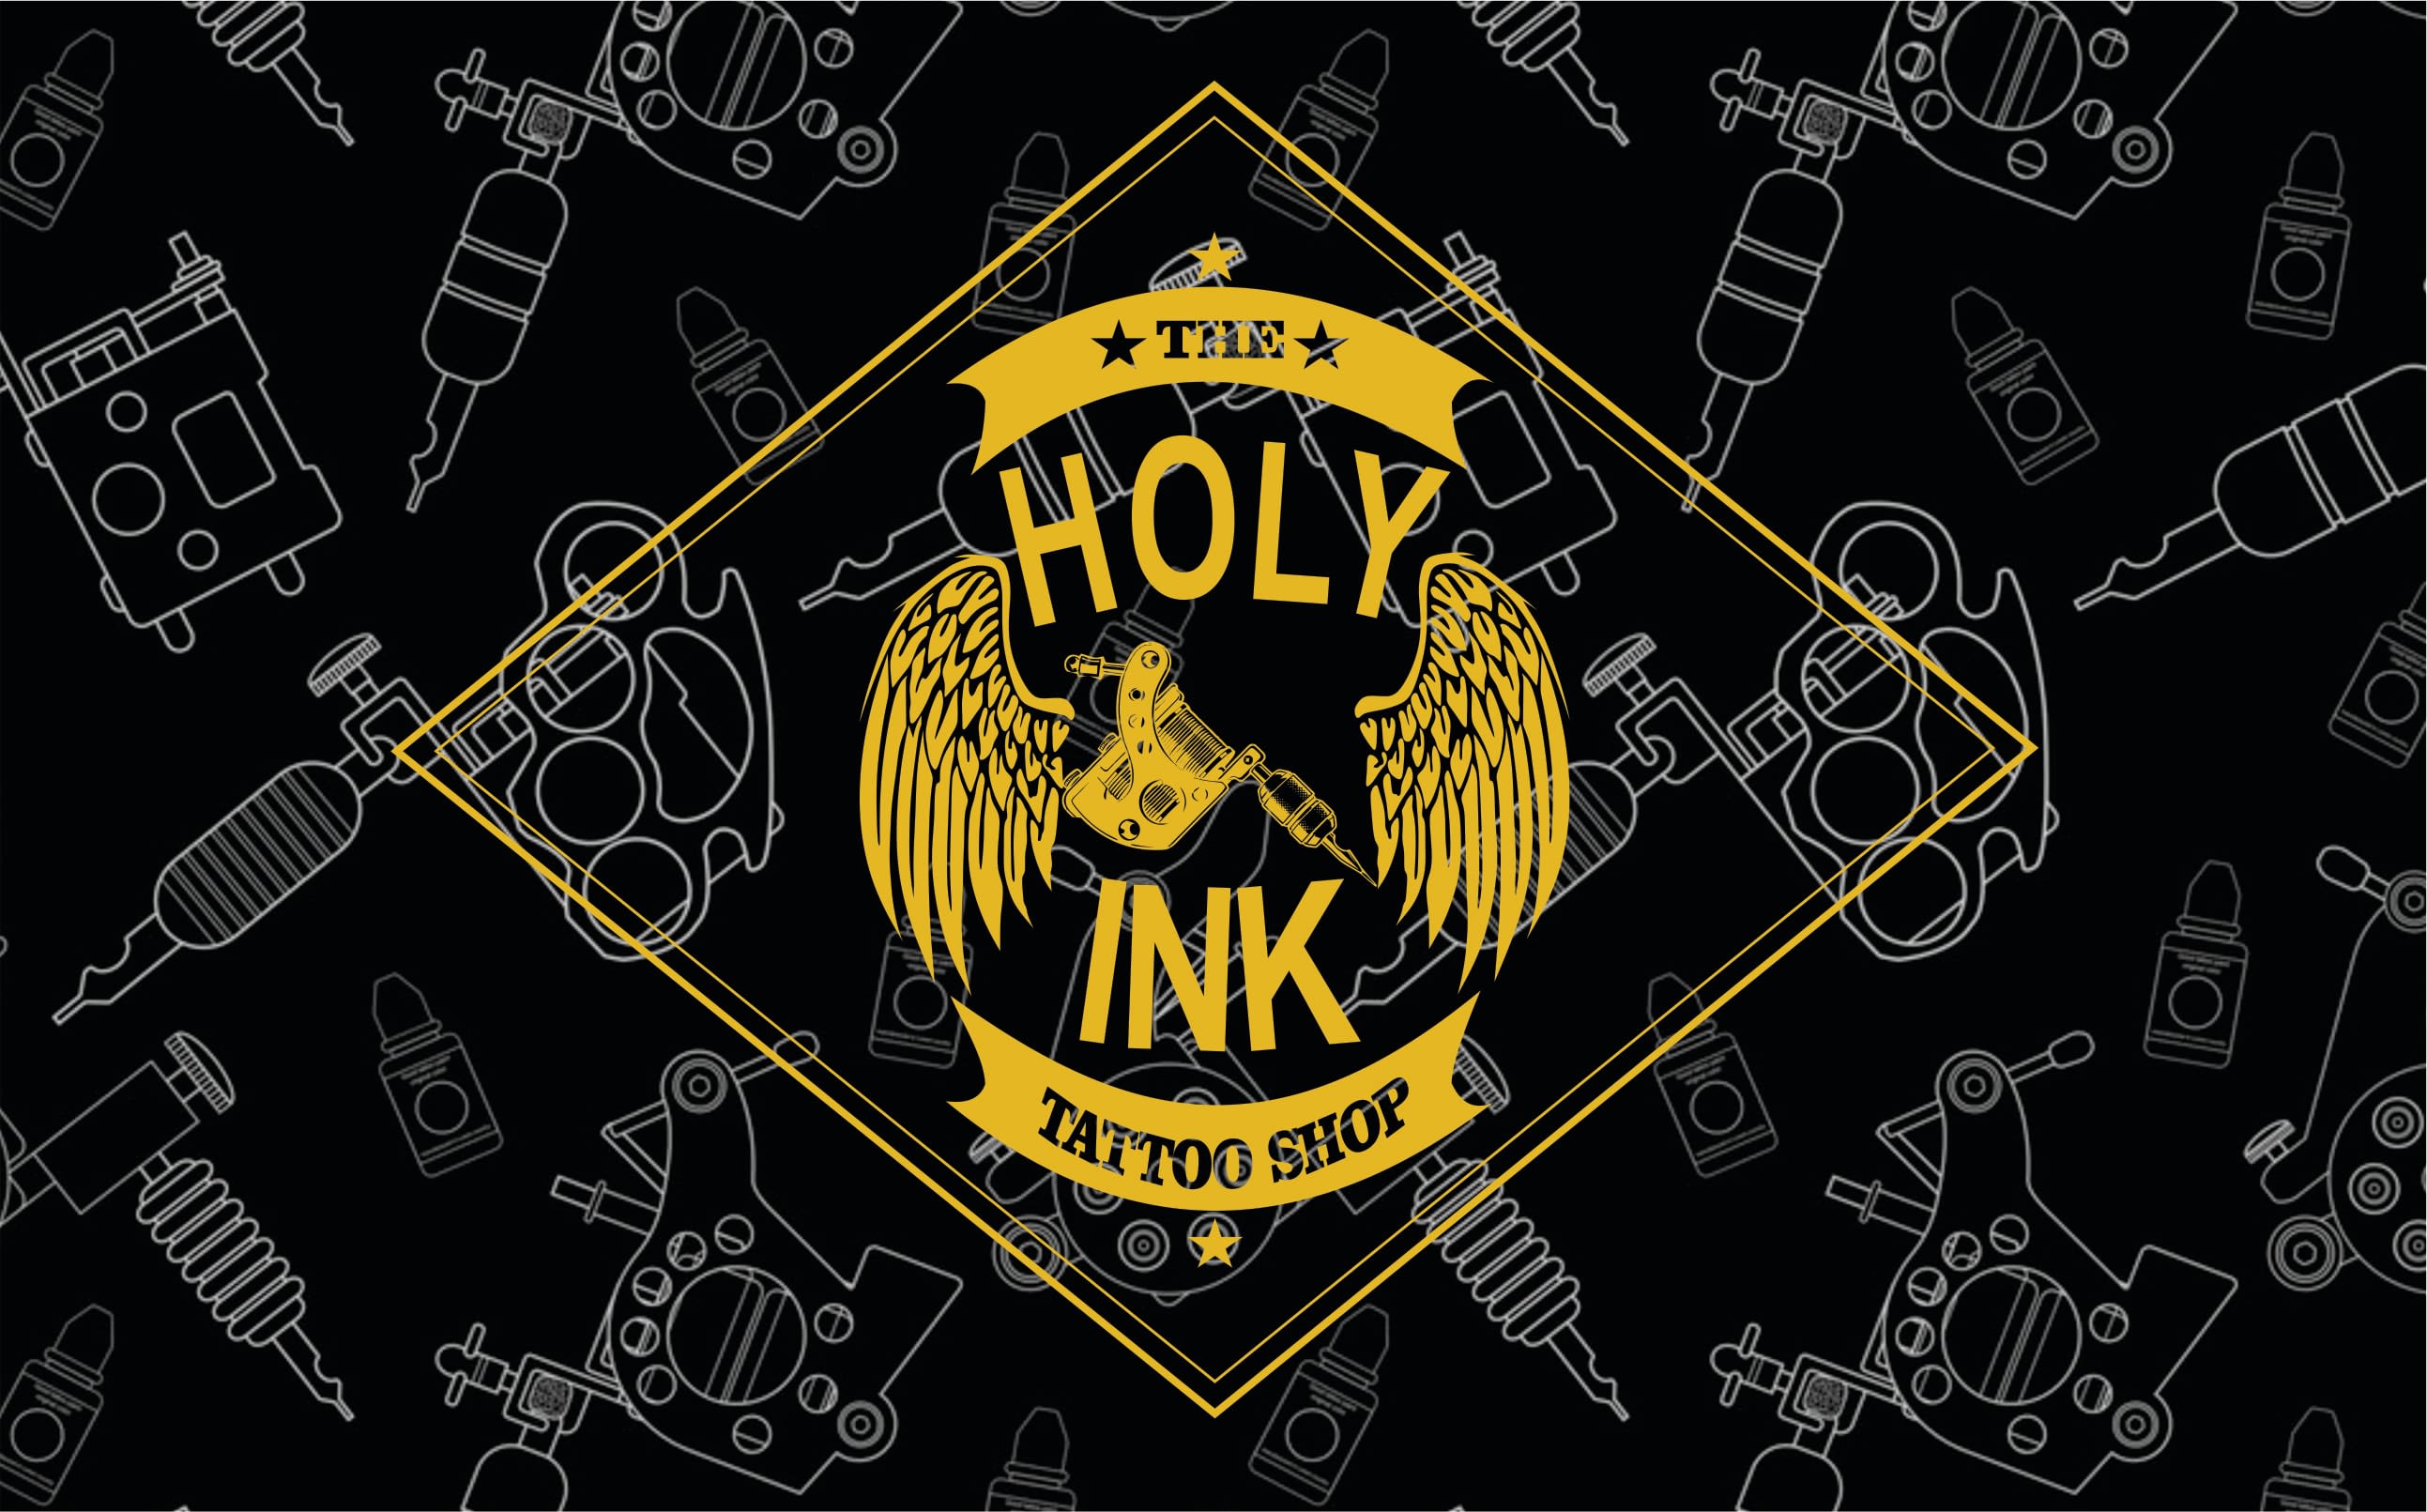 The Holy Ink Tattoo Shop